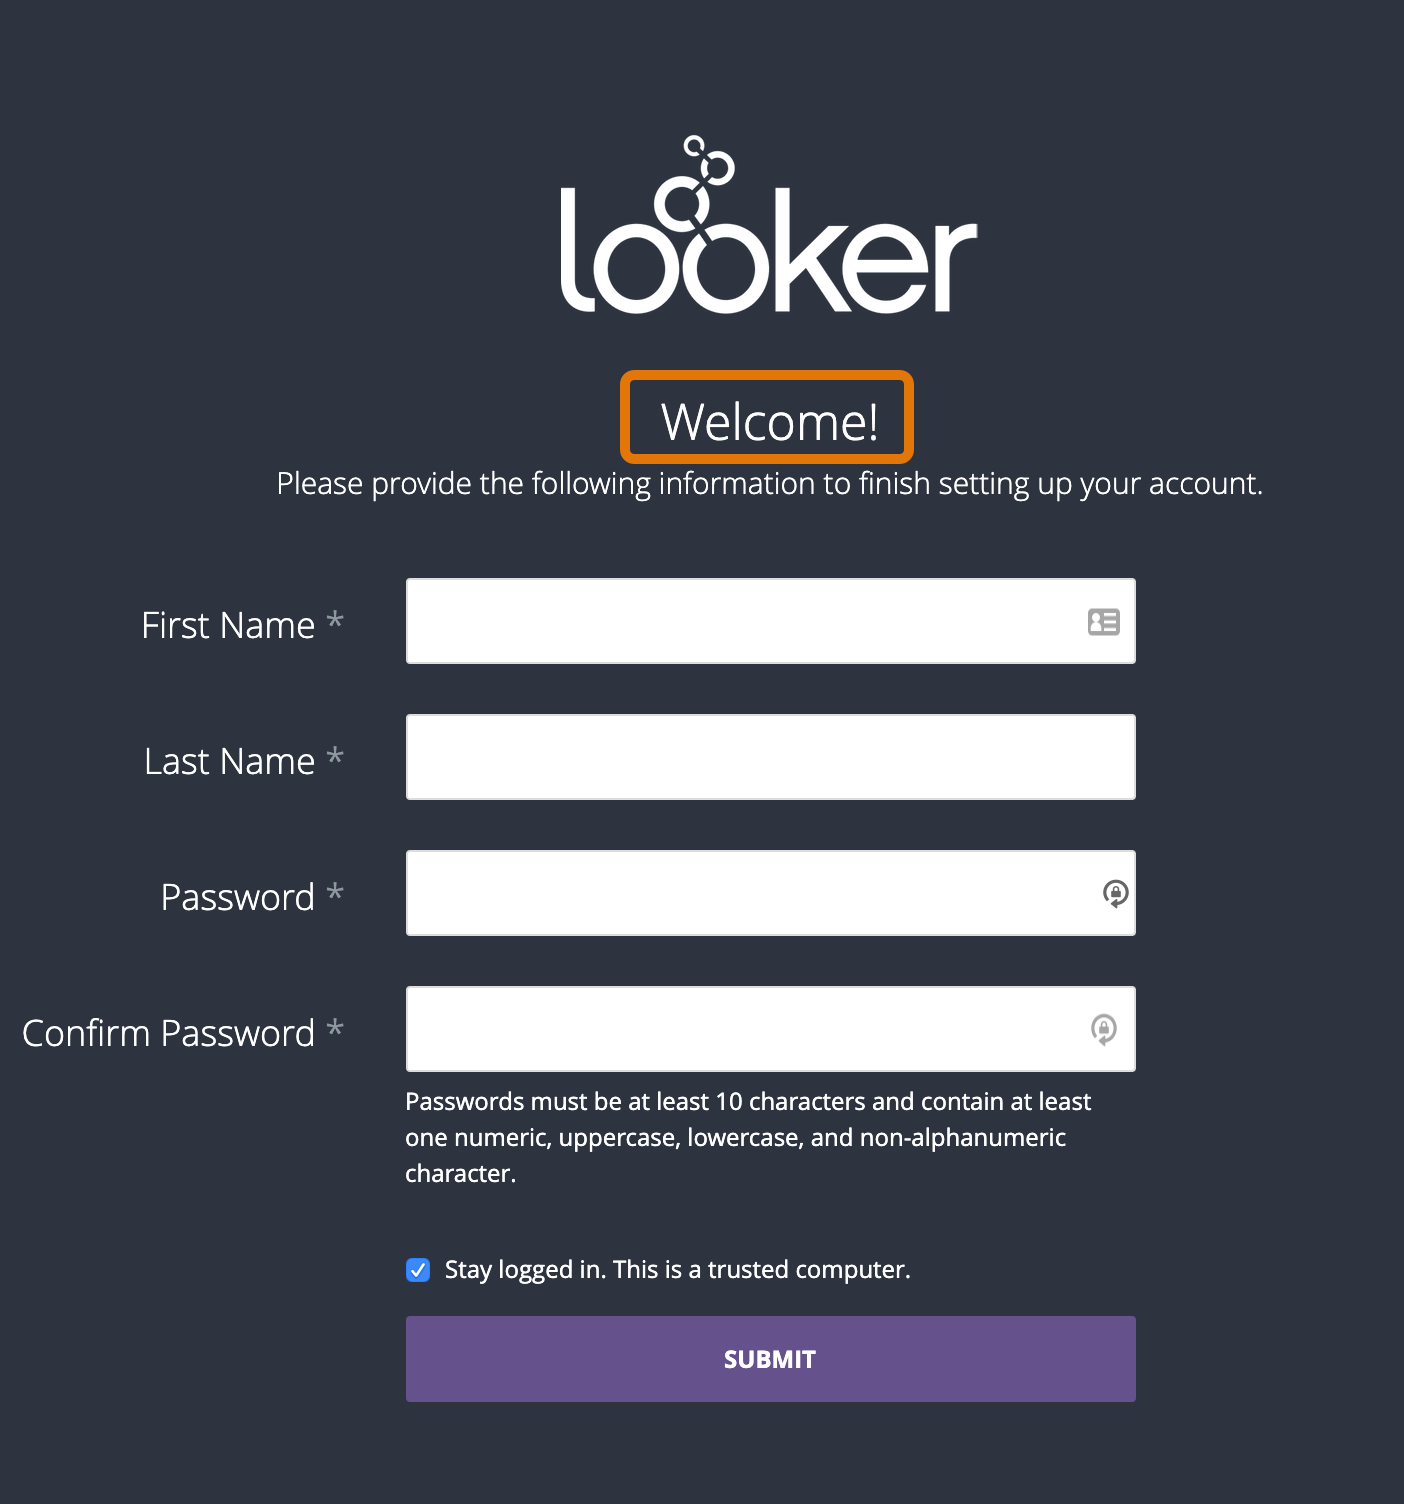 A screenshot of the Looker account setup page. There is a Looker logo at the top of the page, followed by the text 'Welcome!'